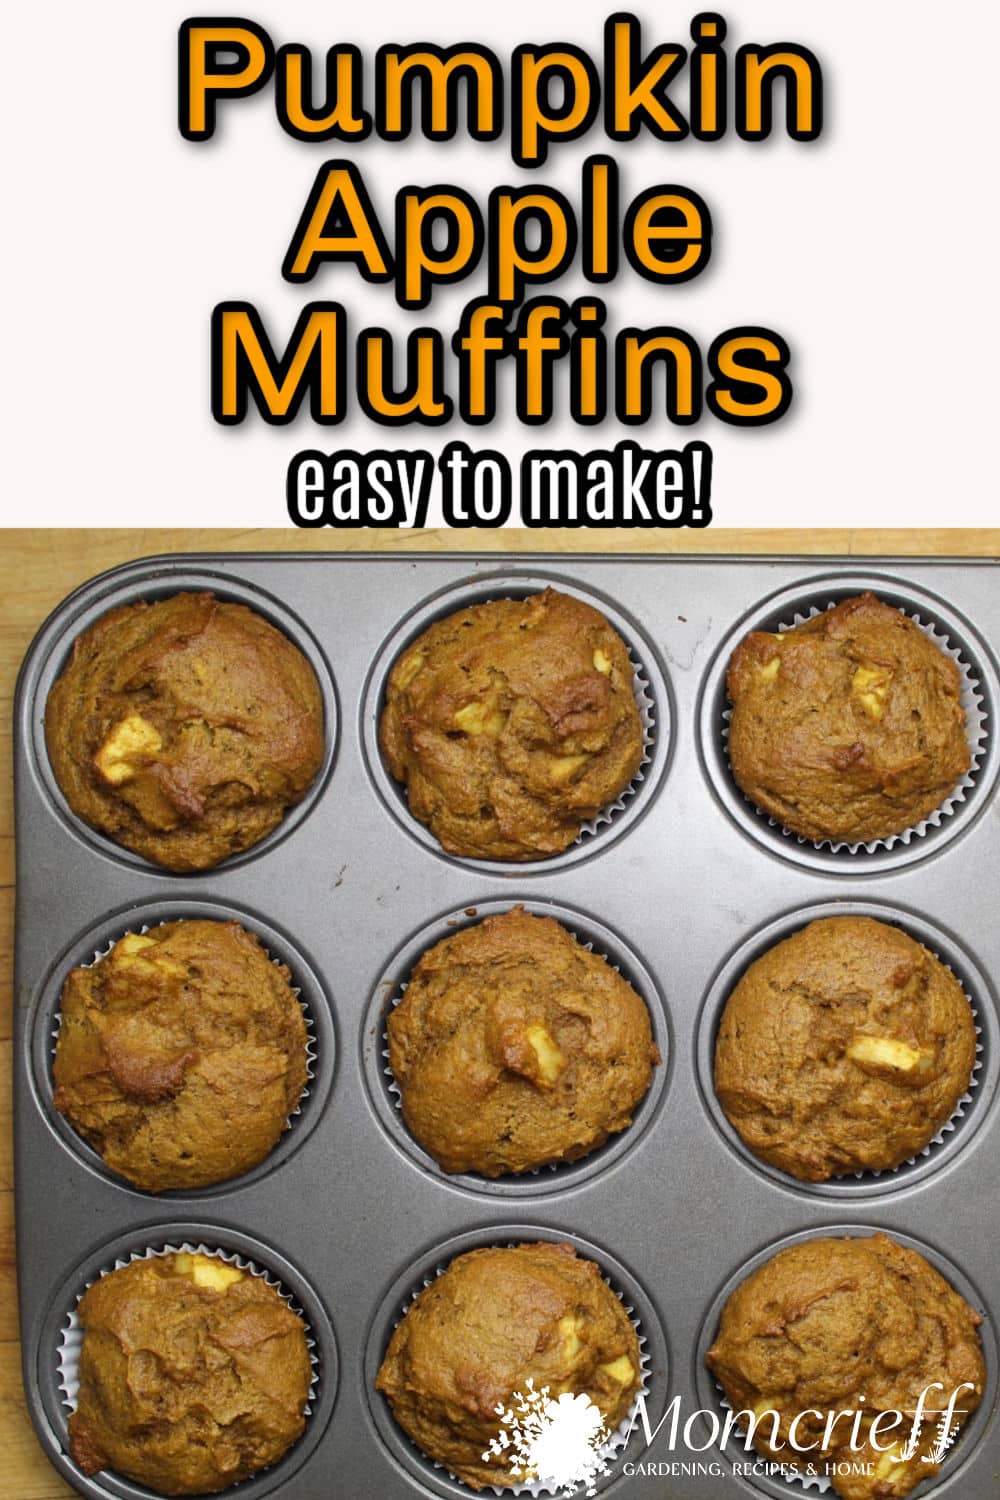 pumpkin apple muffins with a text overlay stating the pumpkin apple muffins are easy to make. 